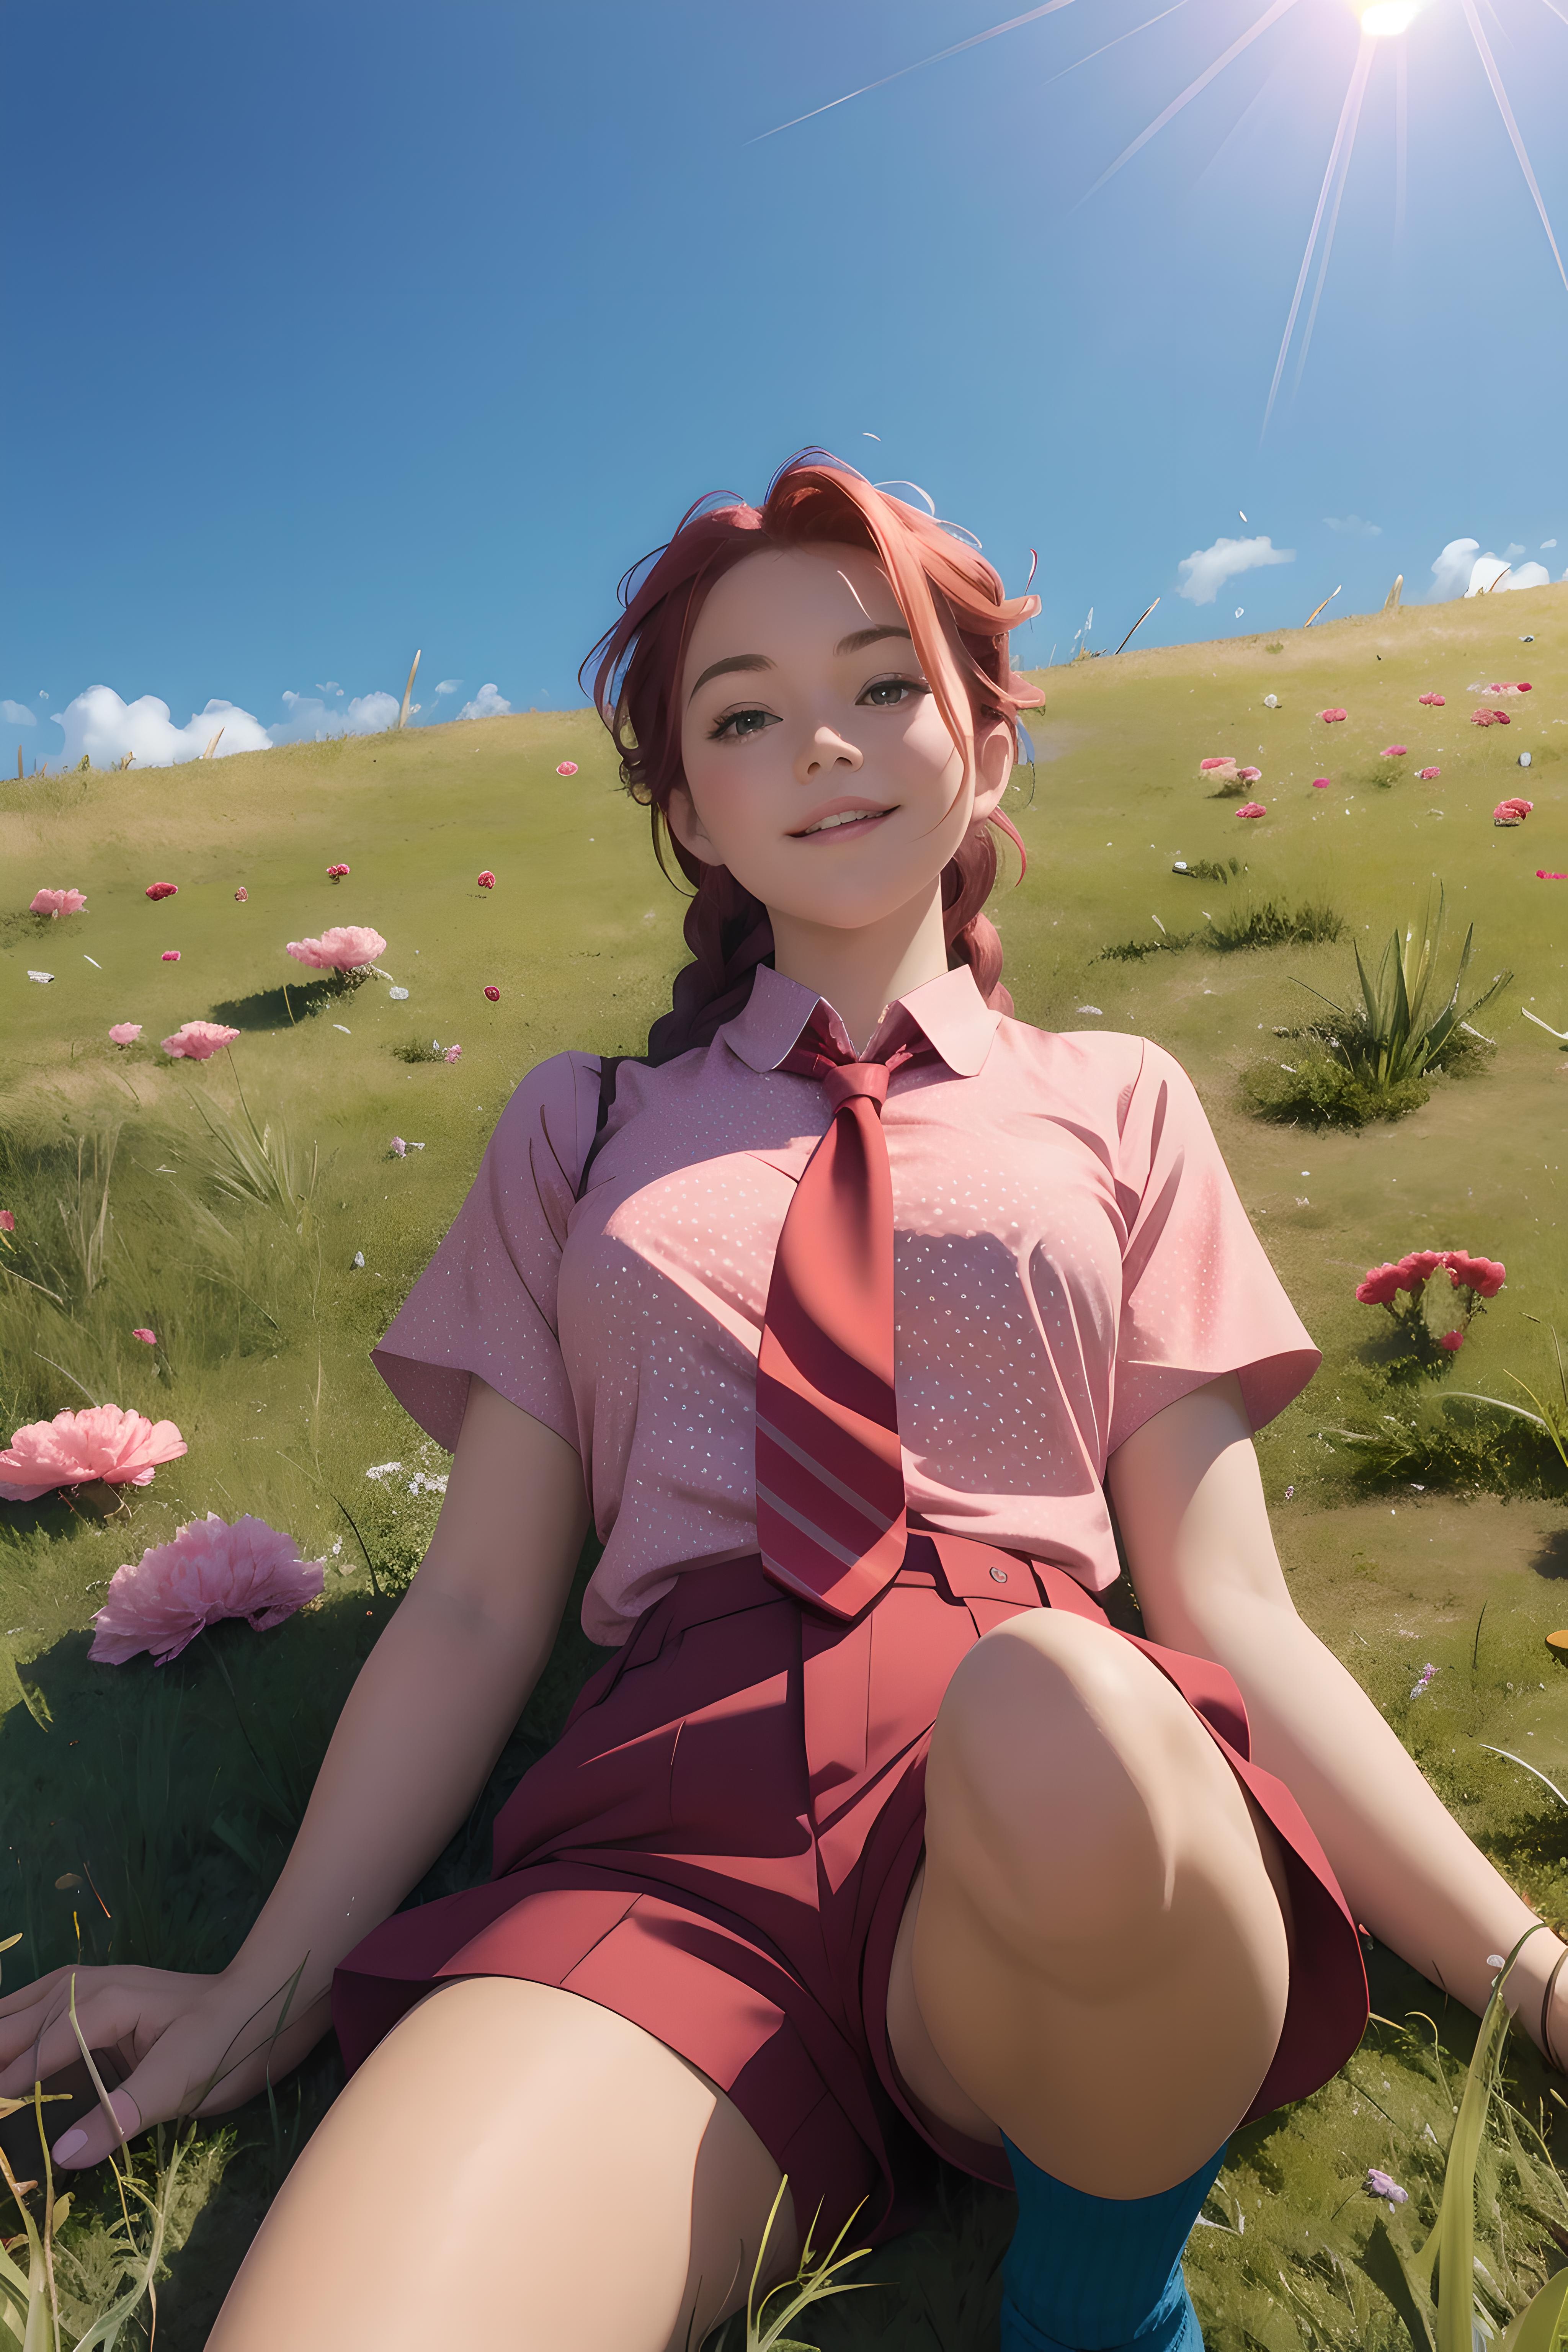 A cartoon girl wearing a tie and shorts sitting in the grass.